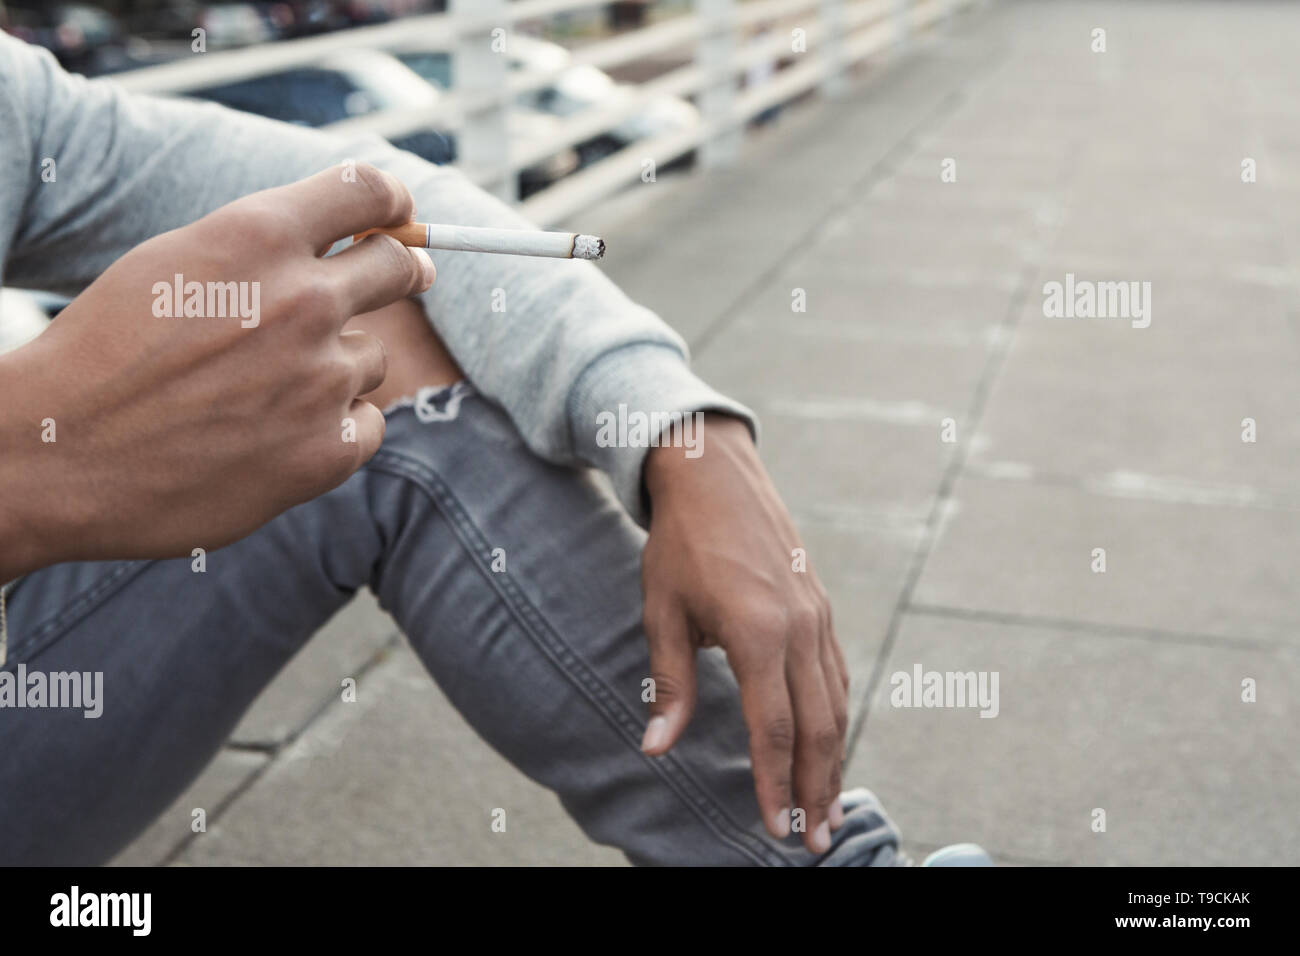 Teen Issues. Black teenager smoking cigarette, sitting alone Stock Photo